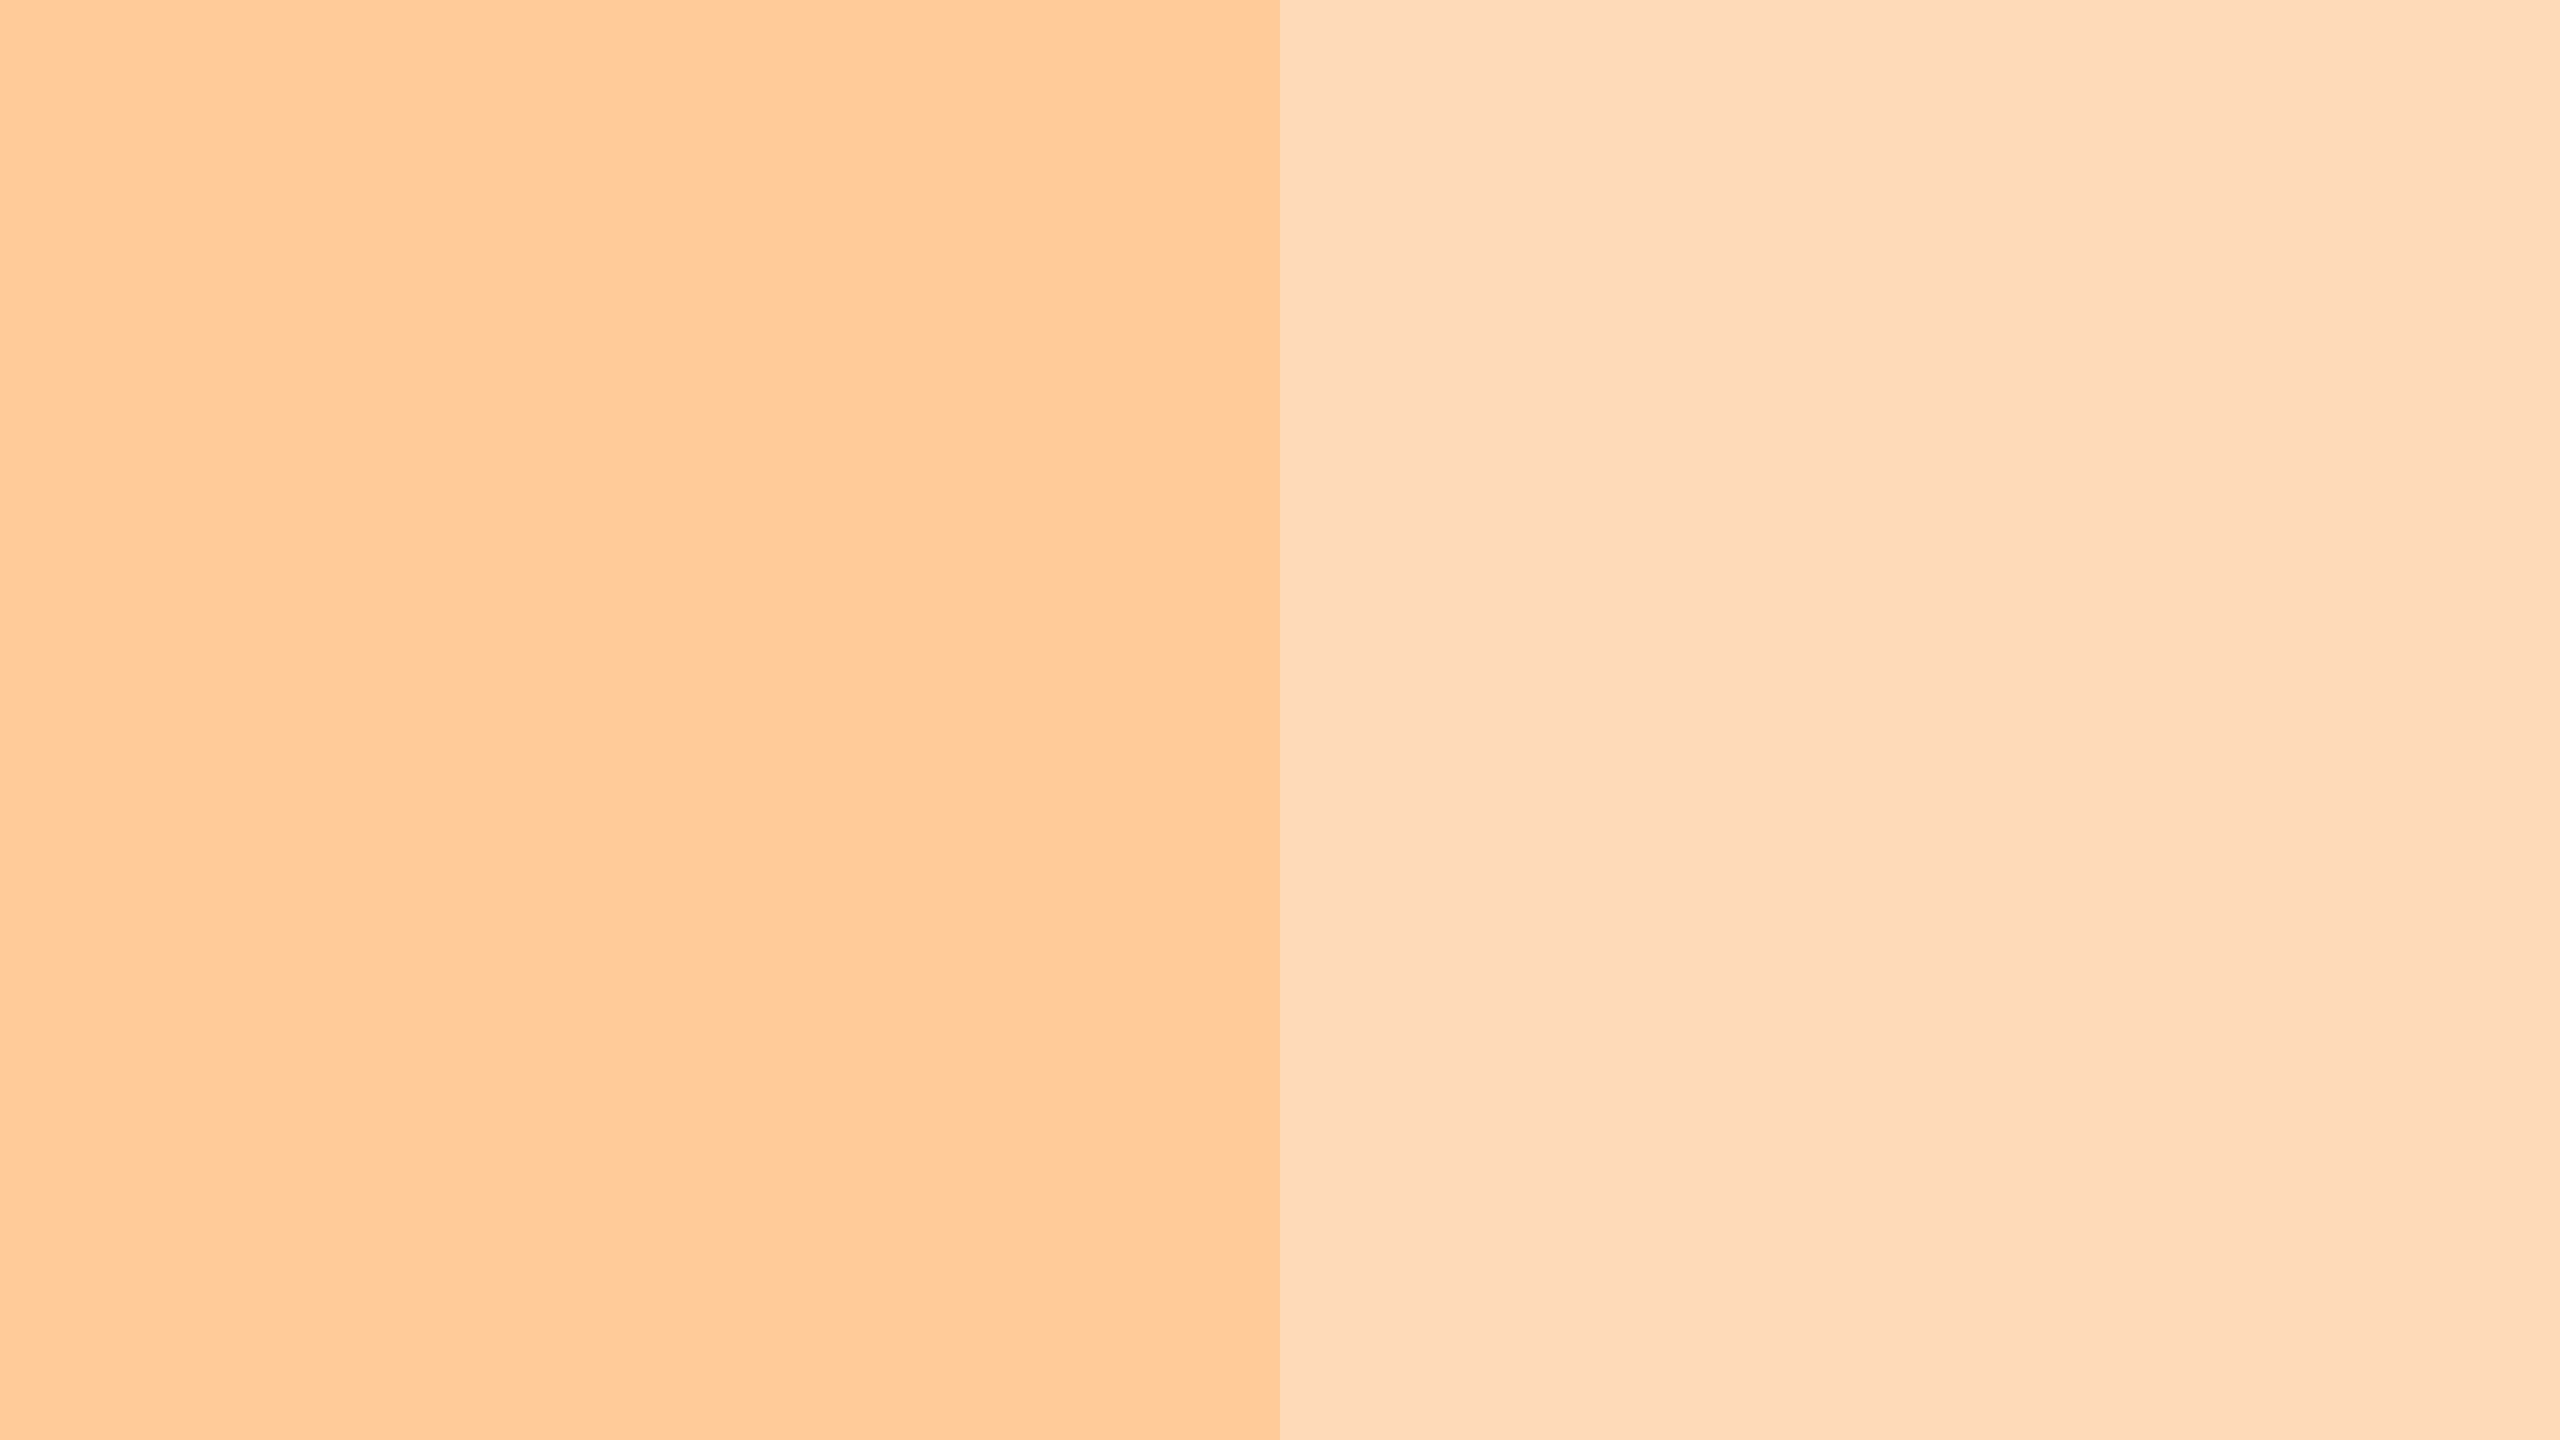 resolution Peach orange and Peach Puff solid two color background